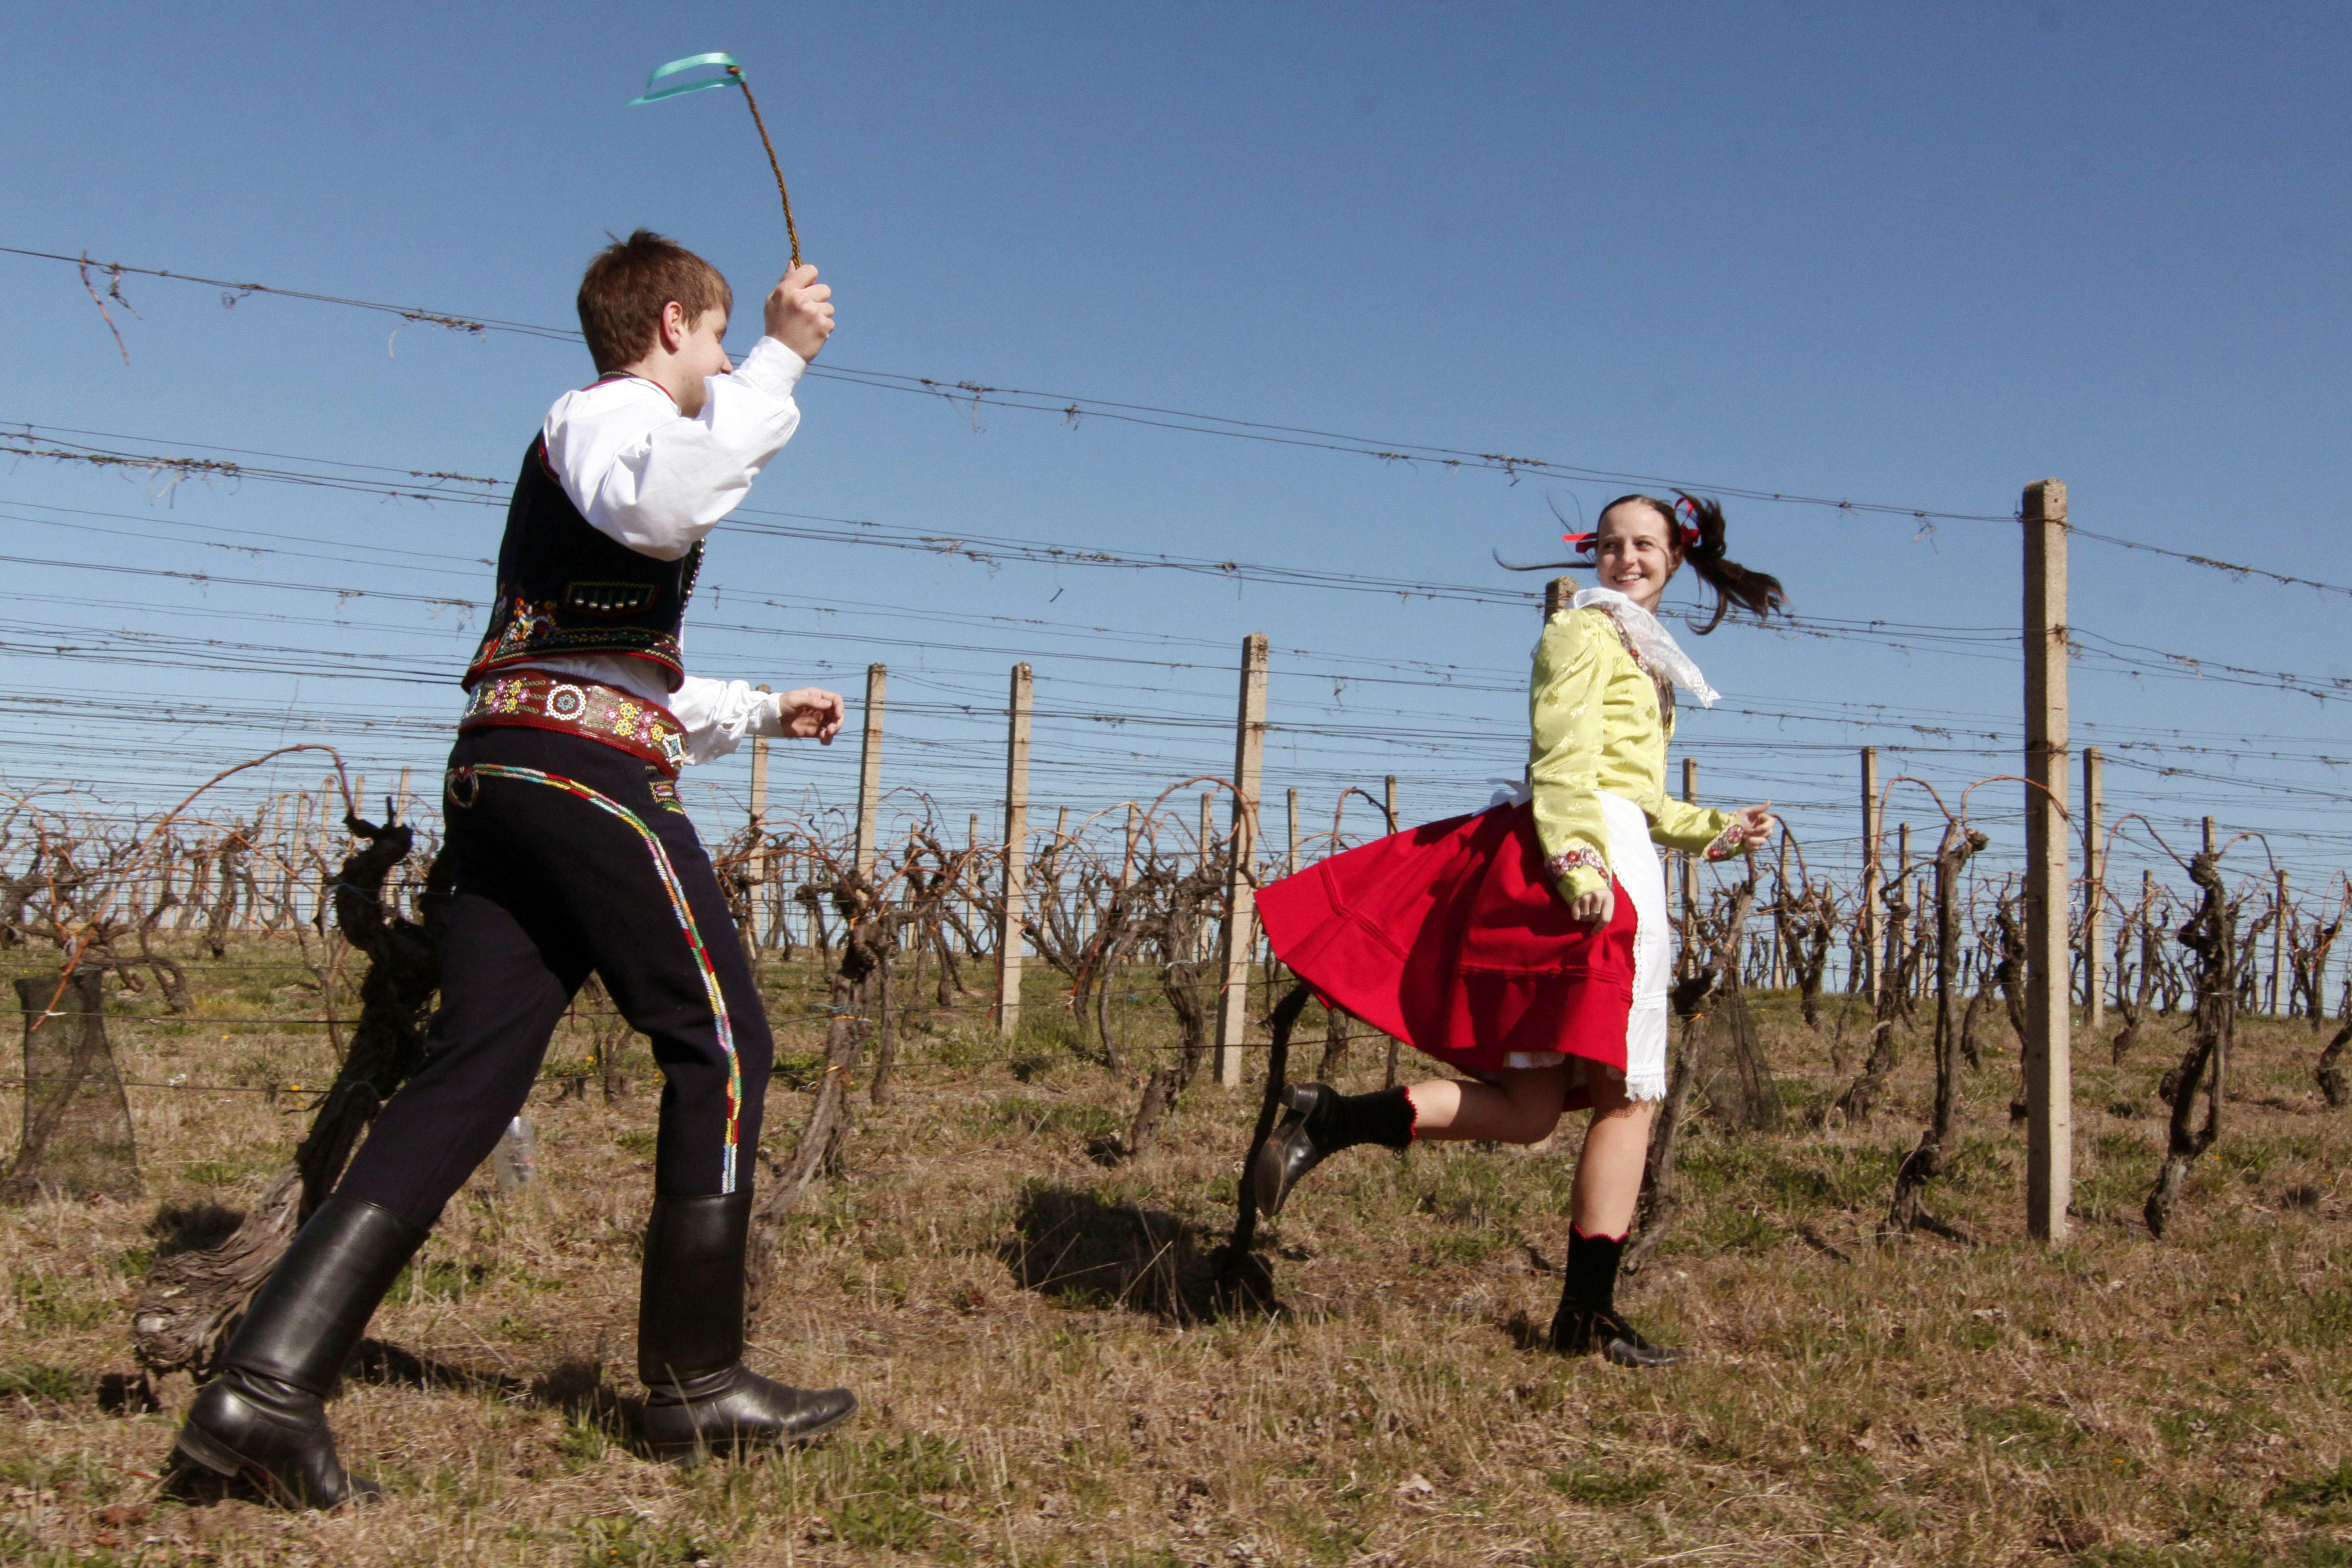 A young man dressed in traditional Czech costume and holding a braided whip is running towards a girl; the girl is running away, laughing.